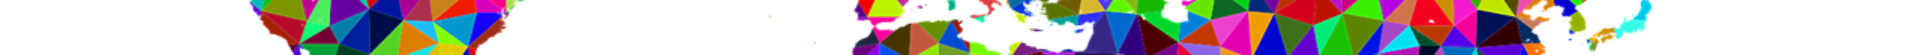 cropped-colorful-1191074_1280-6.png